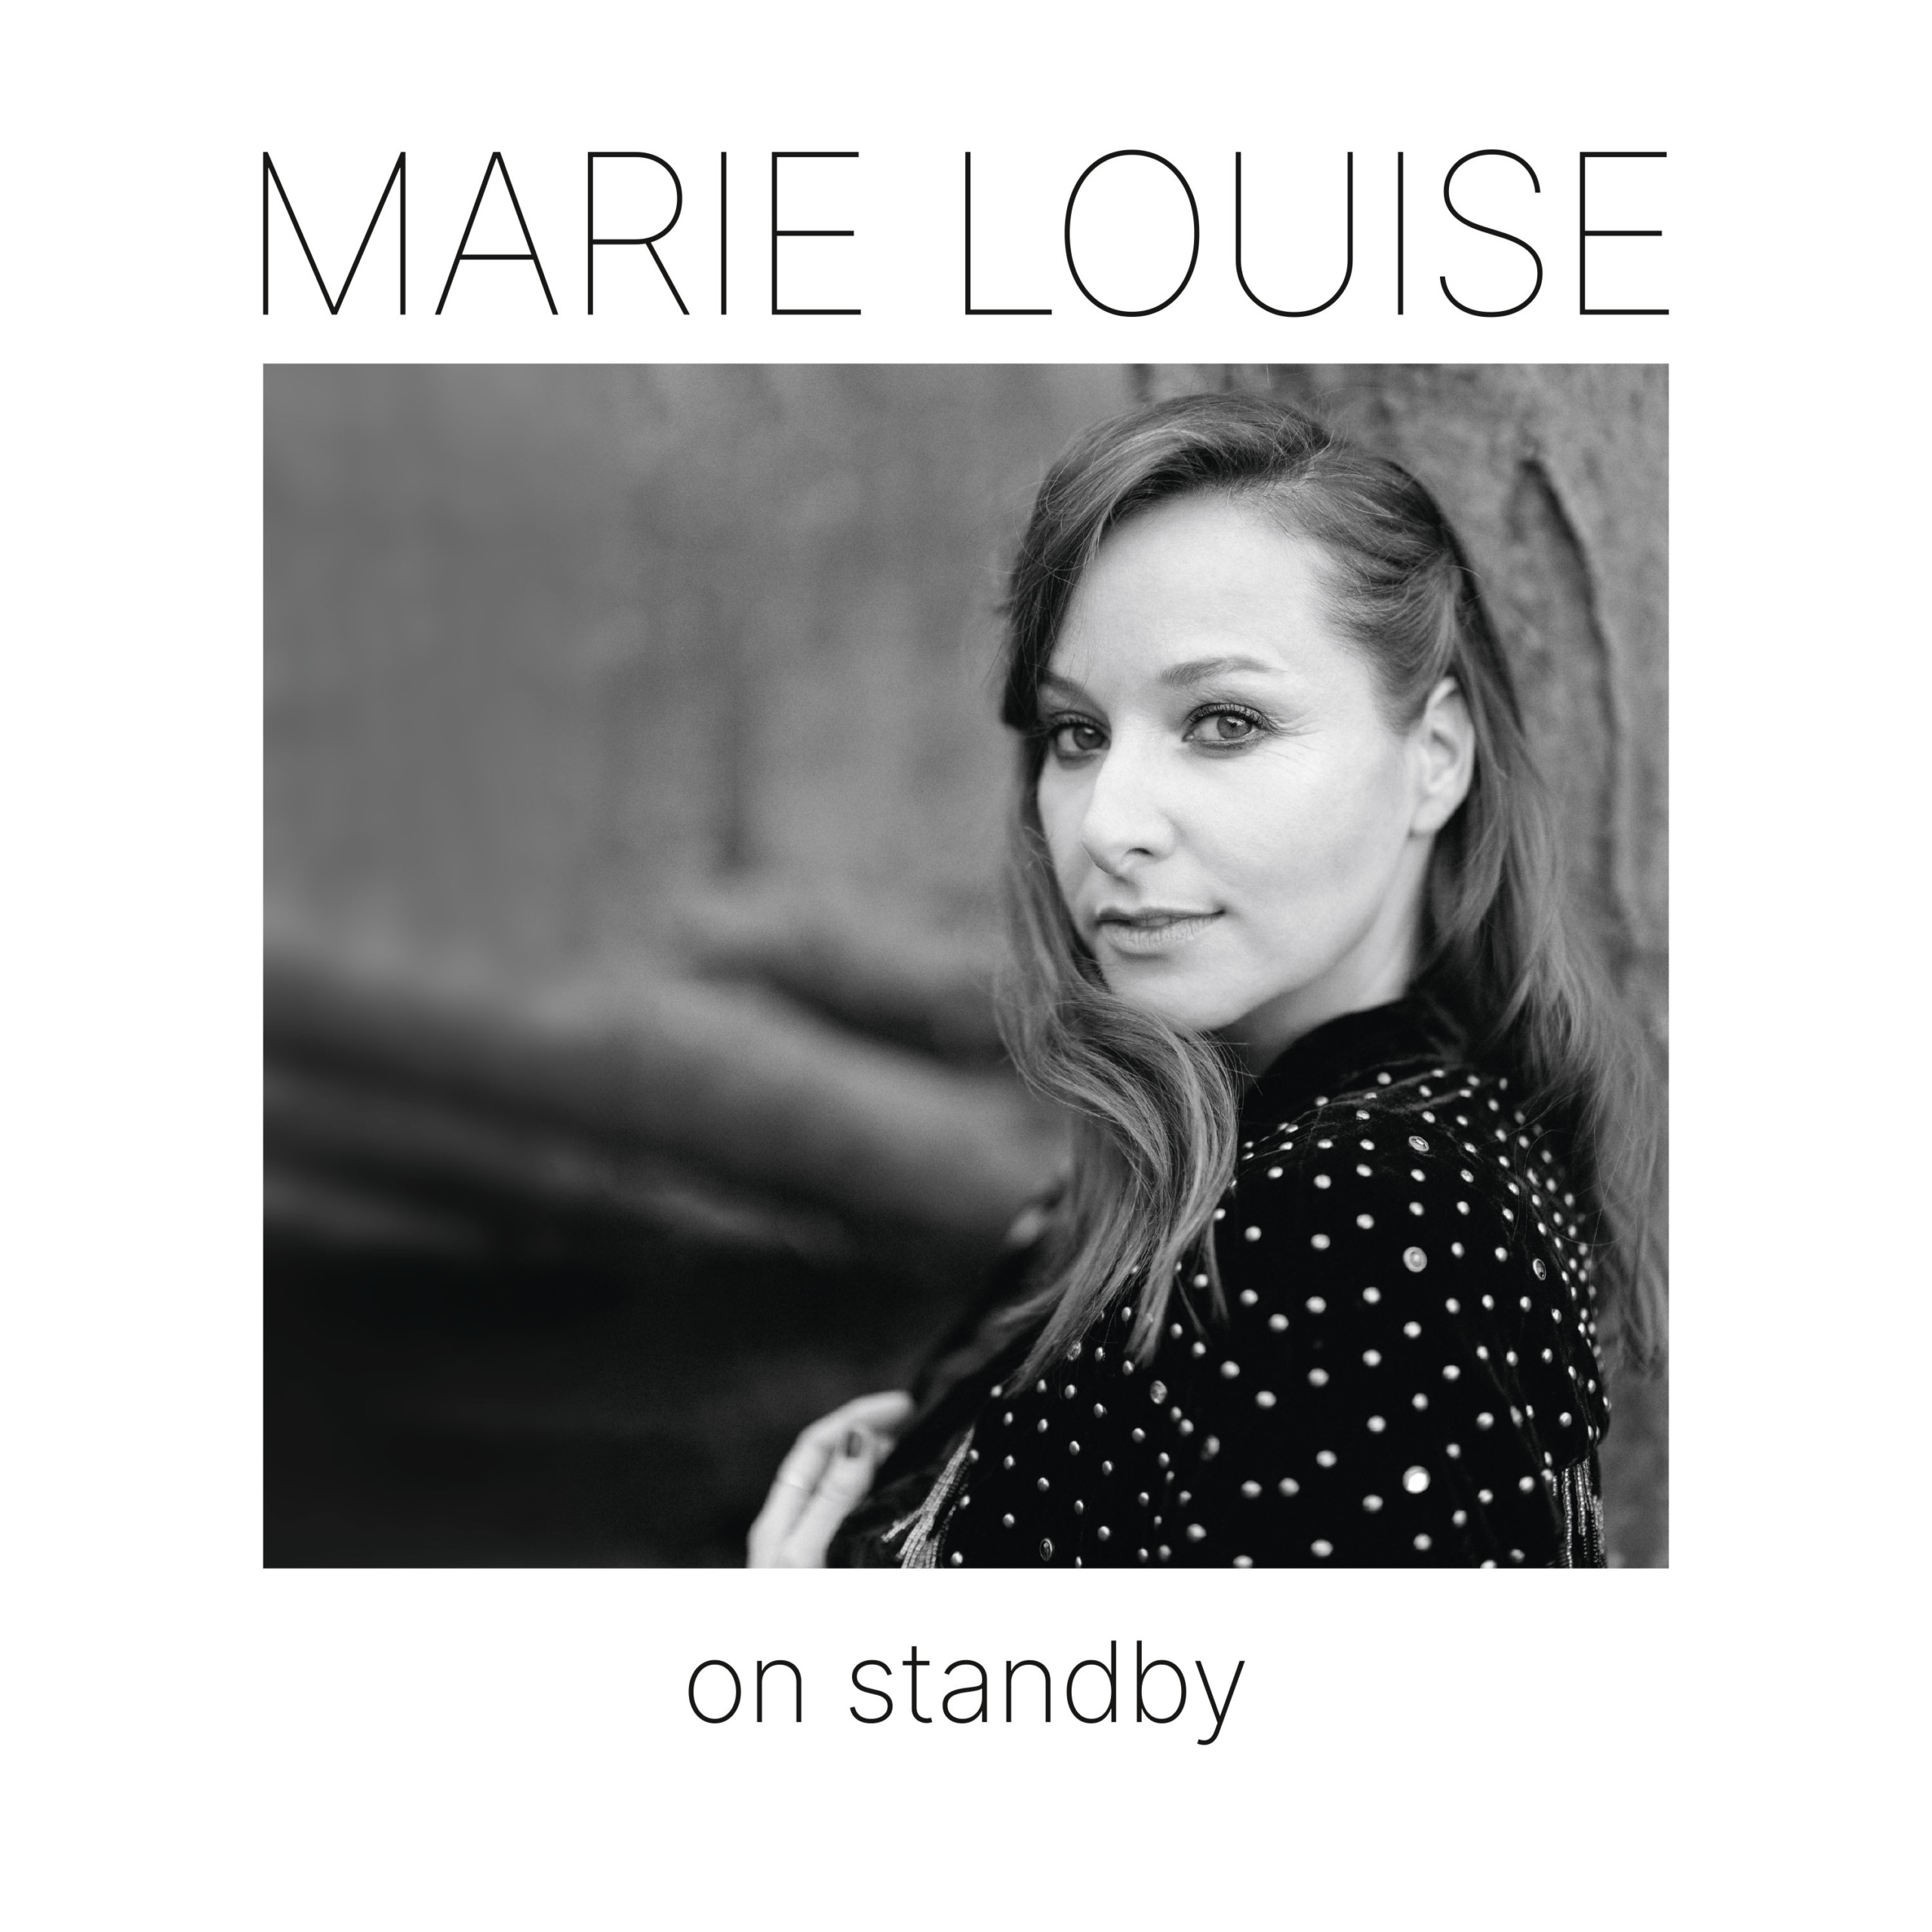 Marielouise on standby